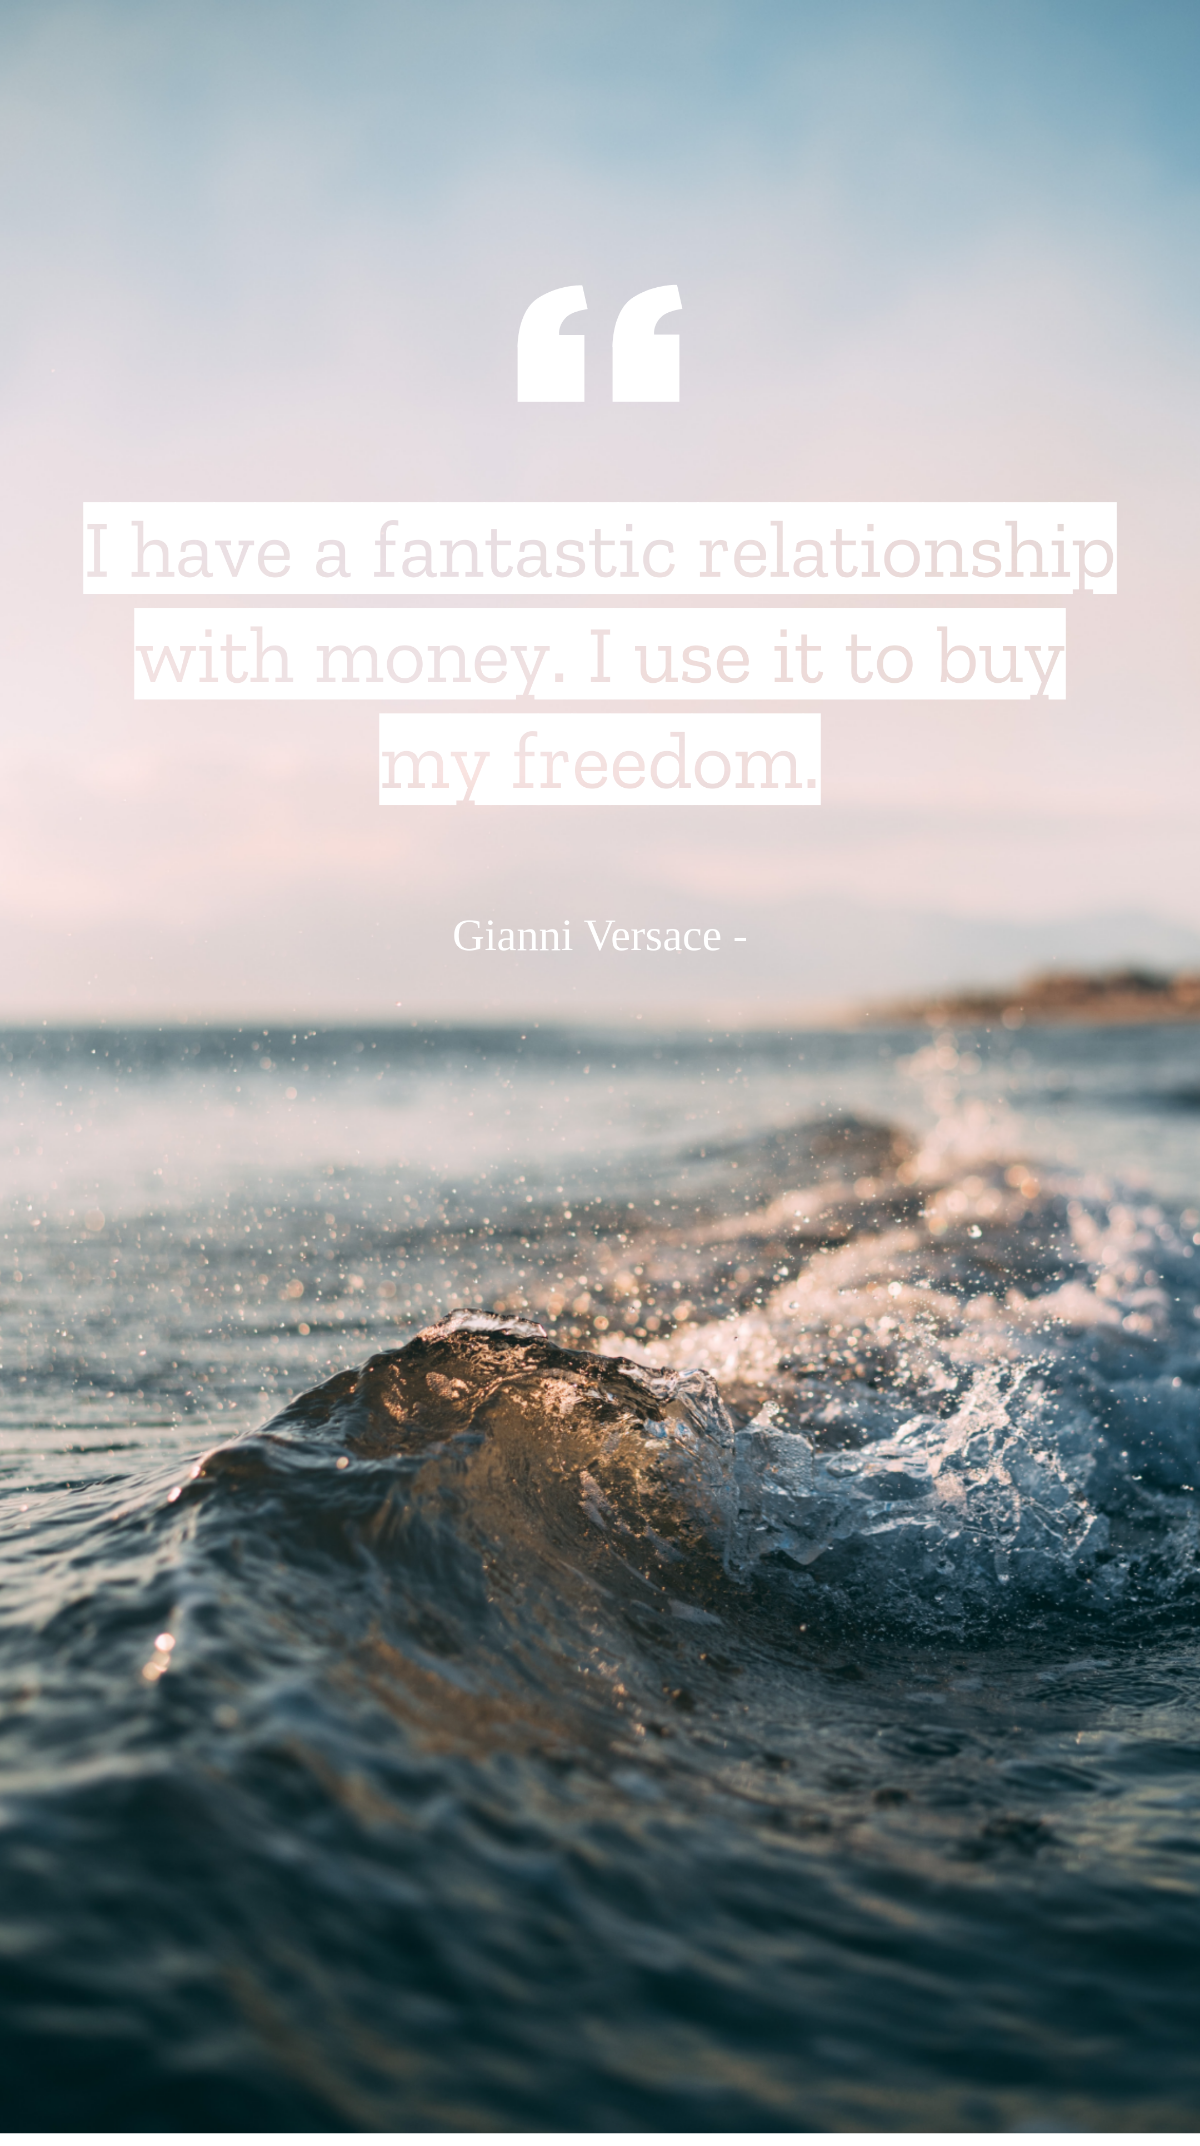 Gianni Versace - I have a fantastic relationship with money. I use it to buy my freedom. Template